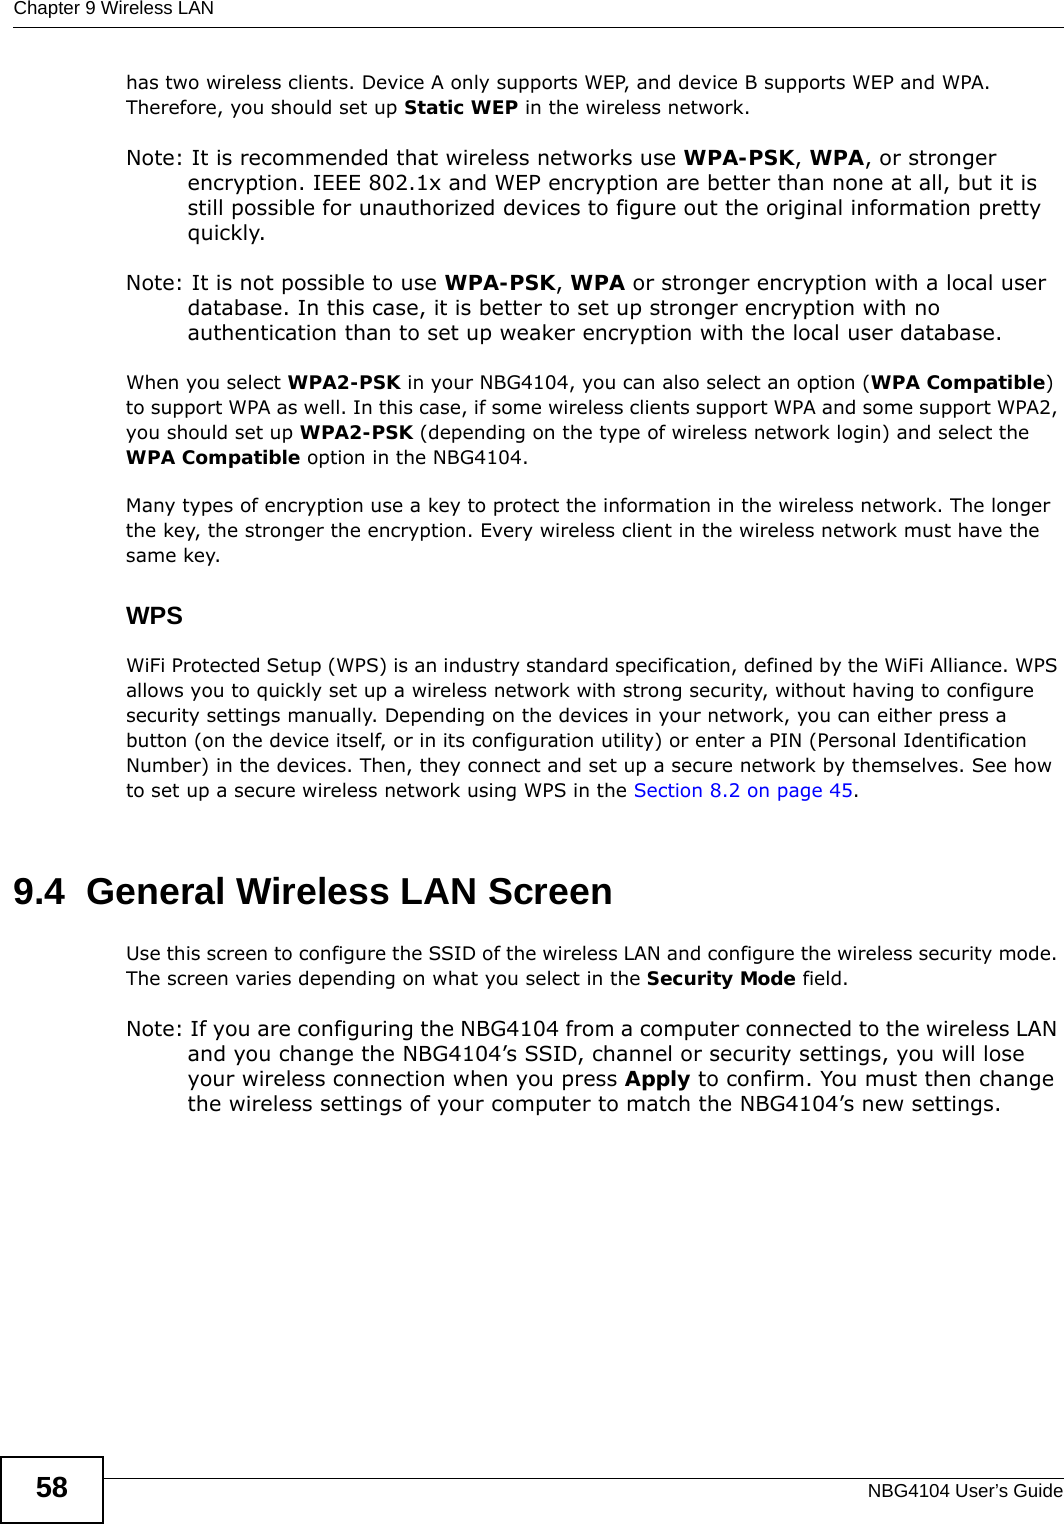 Chapter 9 Wireless LANNBG4104 User’s Guide58has two wireless clients. Device A only supports WEP, and device B supports WEP and WPA. Therefore, you should set up Static WEP in the wireless network.Note: It is recommended that wireless networks use WPA-PSK, WPA, or stronger encryption. IEEE 802.1x and WEP encryption are better than none at all, but it is still possible for unauthorized devices to figure out the original information pretty quickly.Note: It is not possible to use WPA-PSK, WPA or stronger encryption with a local user database. In this case, it is better to set up stronger encryption with no authentication than to set up weaker encryption with the local user database.When you select WPA2-PSK in your NBG4104, you can also select an option (WPA Compatible) to support WPA as well. In this case, if some wireless clients support WPA and some support WPA2, you should set up WPA2-PSK (depending on the type of wireless network login) and select the WPA Compatible option in the NBG4104.Many types of encryption use a key to protect the information in the wireless network. The longer the key, the stronger the encryption. Every wireless client in the wireless network must have the same key.WPSWiFi Protected Setup (WPS) is an industry standard specification, defined by the WiFi Alliance. WPS allows you to quickly set up a wireless network with strong security, without having to configure security settings manually. Depending on the devices in your network, you can either press a button (on the device itself, or in its configuration utility) or enter a PIN (Personal Identification Number) in the devices. Then, they connect and set up a secure network by themselves. See how to set up a secure wireless network using WPS in the Section 8.2 on page 45. 9.4  General Wireless LAN Screen Use this screen to configure the SSID of the wireless LAN and configure the wireless security mode. The screen varies depending on what you select in the Security Mode field.Note: If you are configuring the NBG4104 from a computer connected to the wireless LAN and you change the NBG4104’s SSID, channel or security settings, you will lose your wireless connection when you press Apply to confirm. You must then change the wireless settings of your computer to match the NBG4104’s new settings.